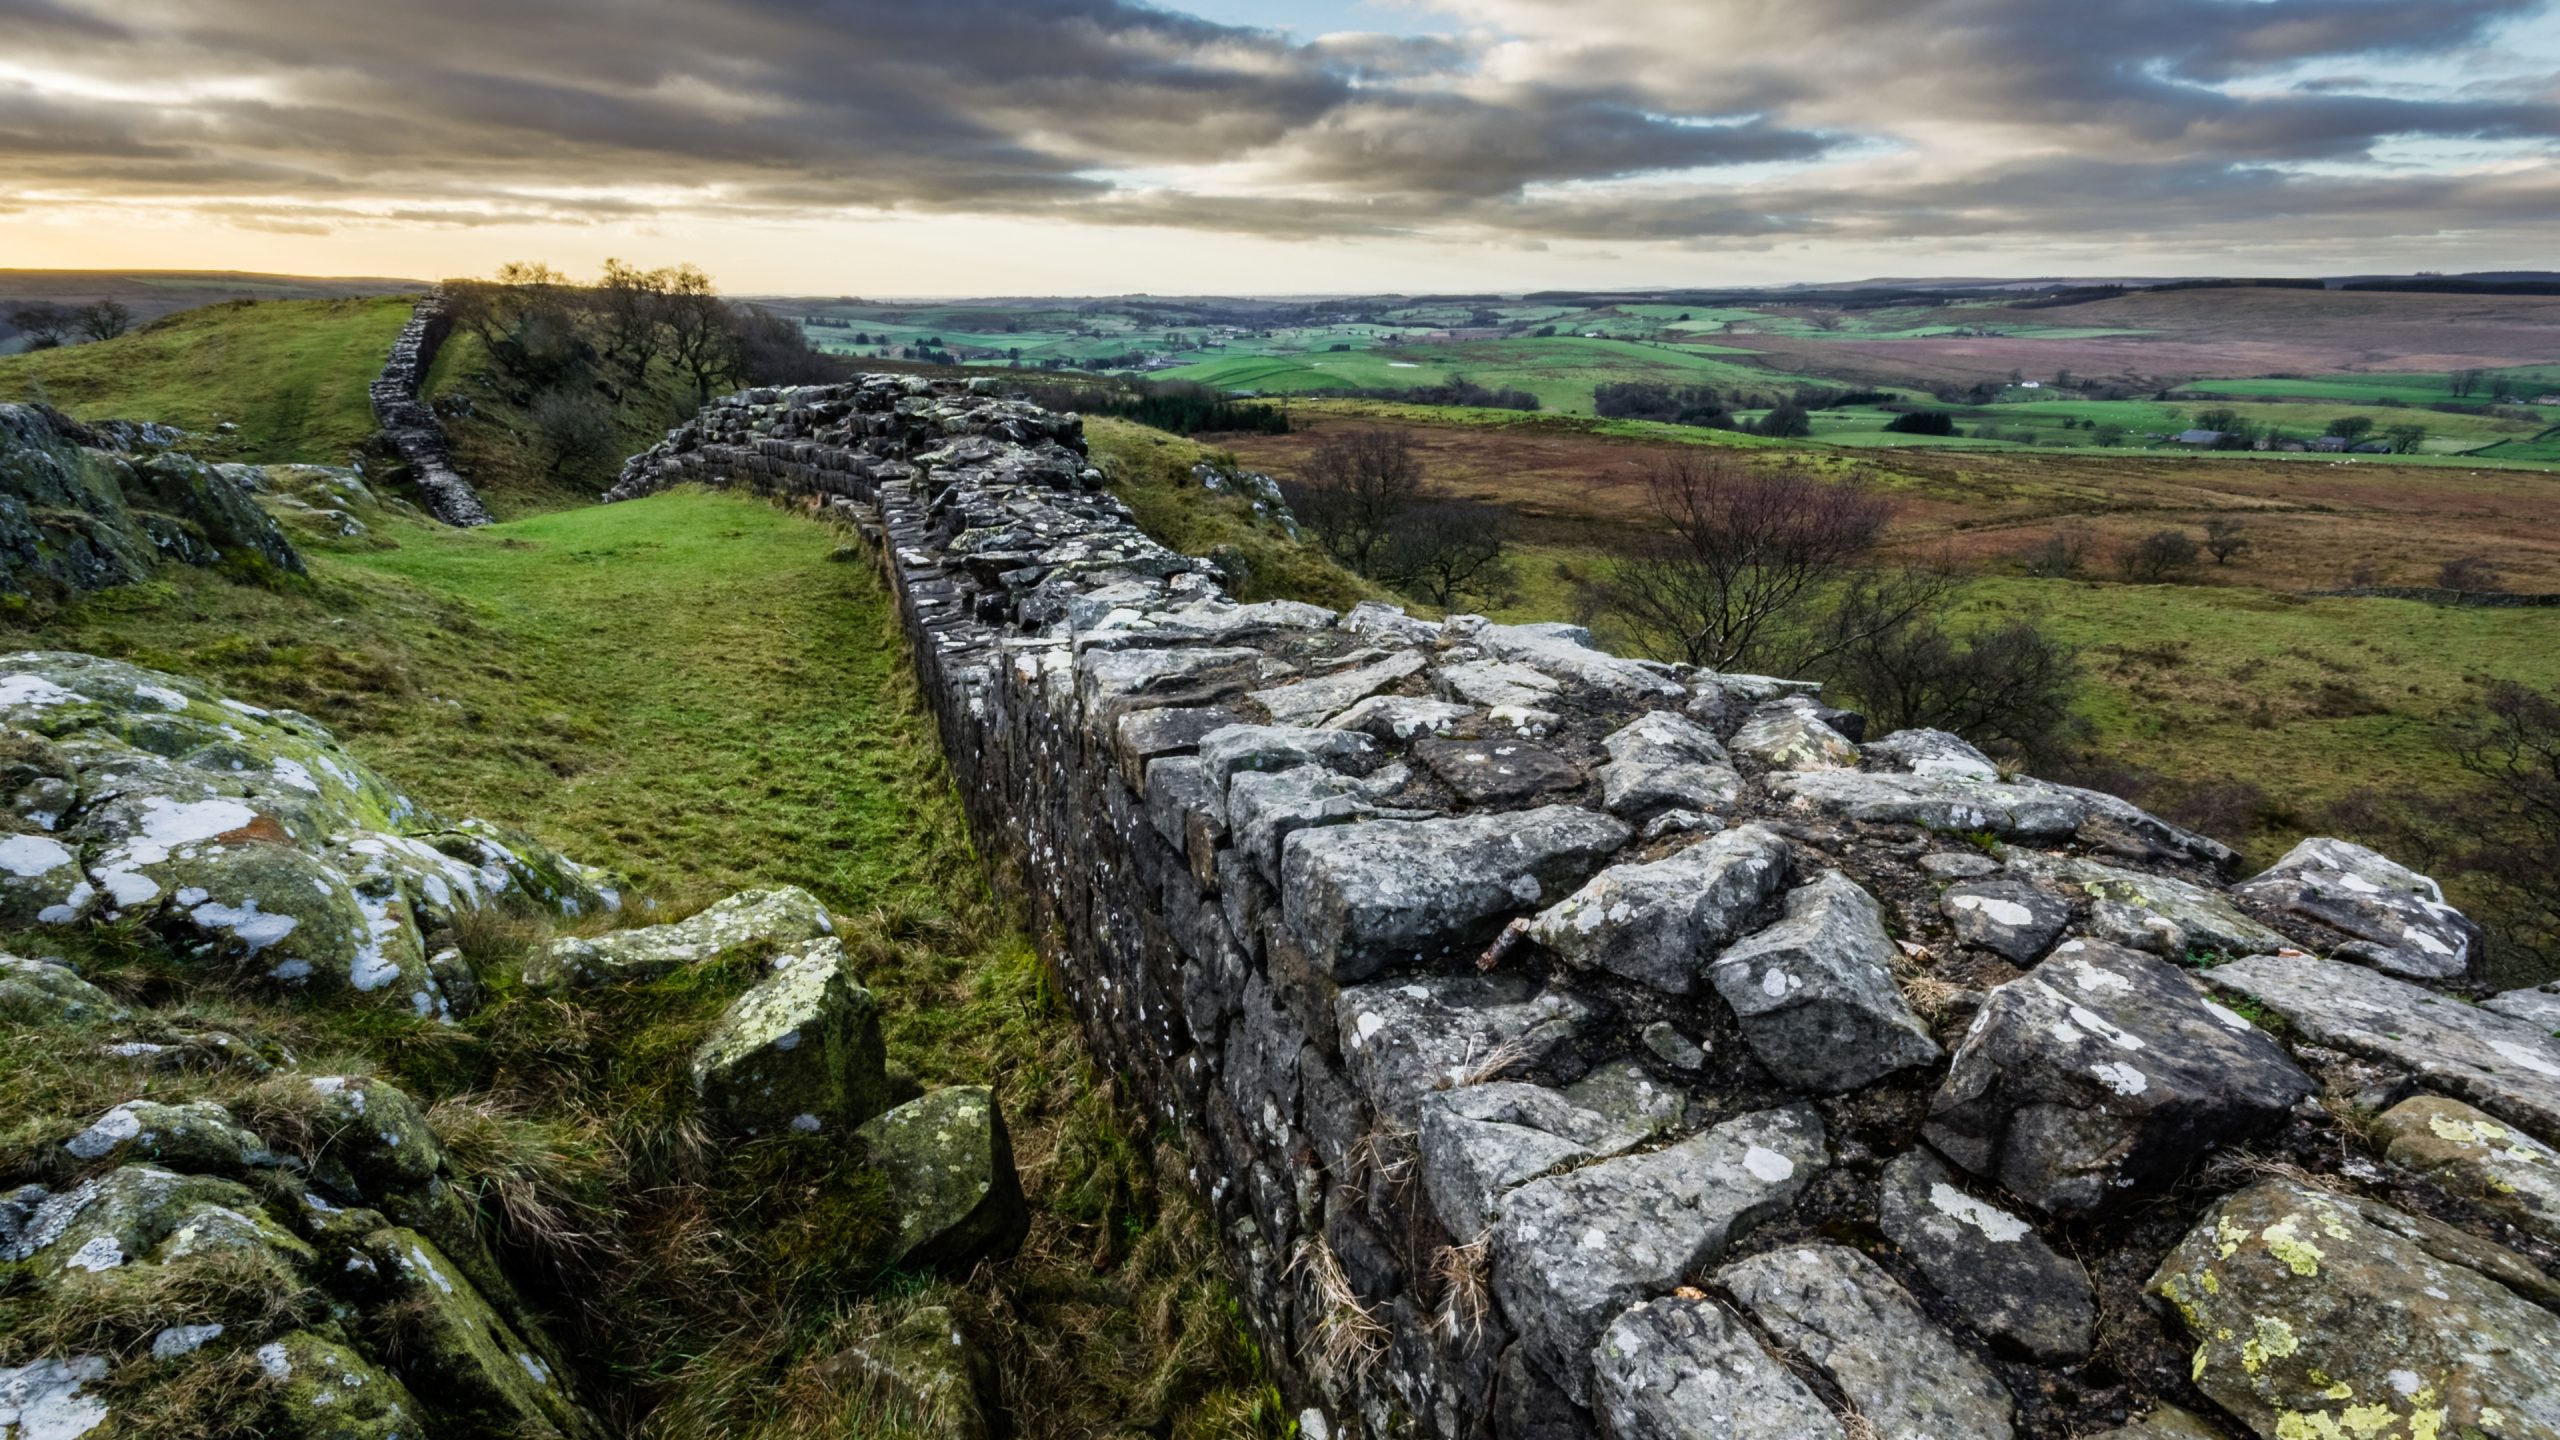 Hadrians Wall in Northumberland National Park